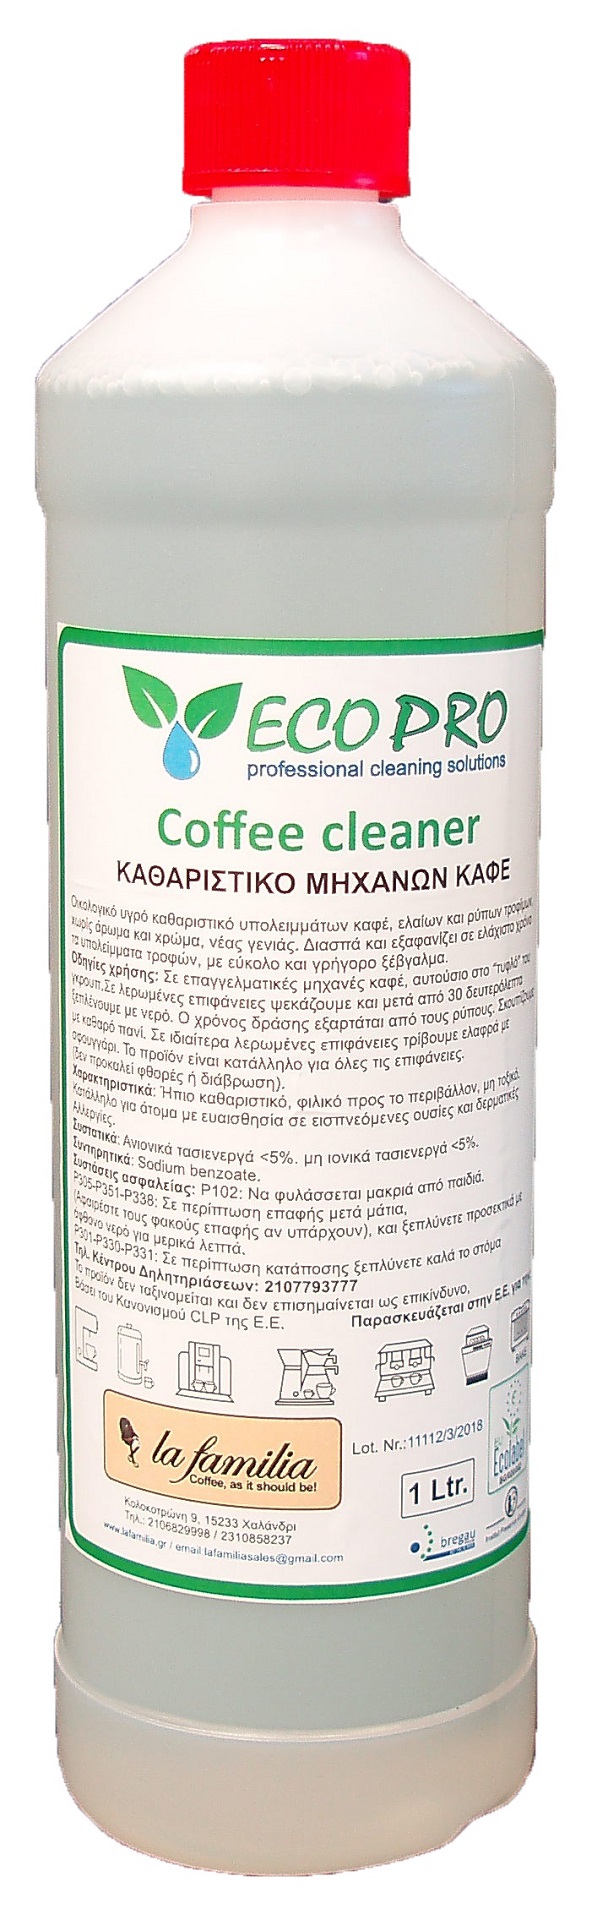 Coffee cleaner